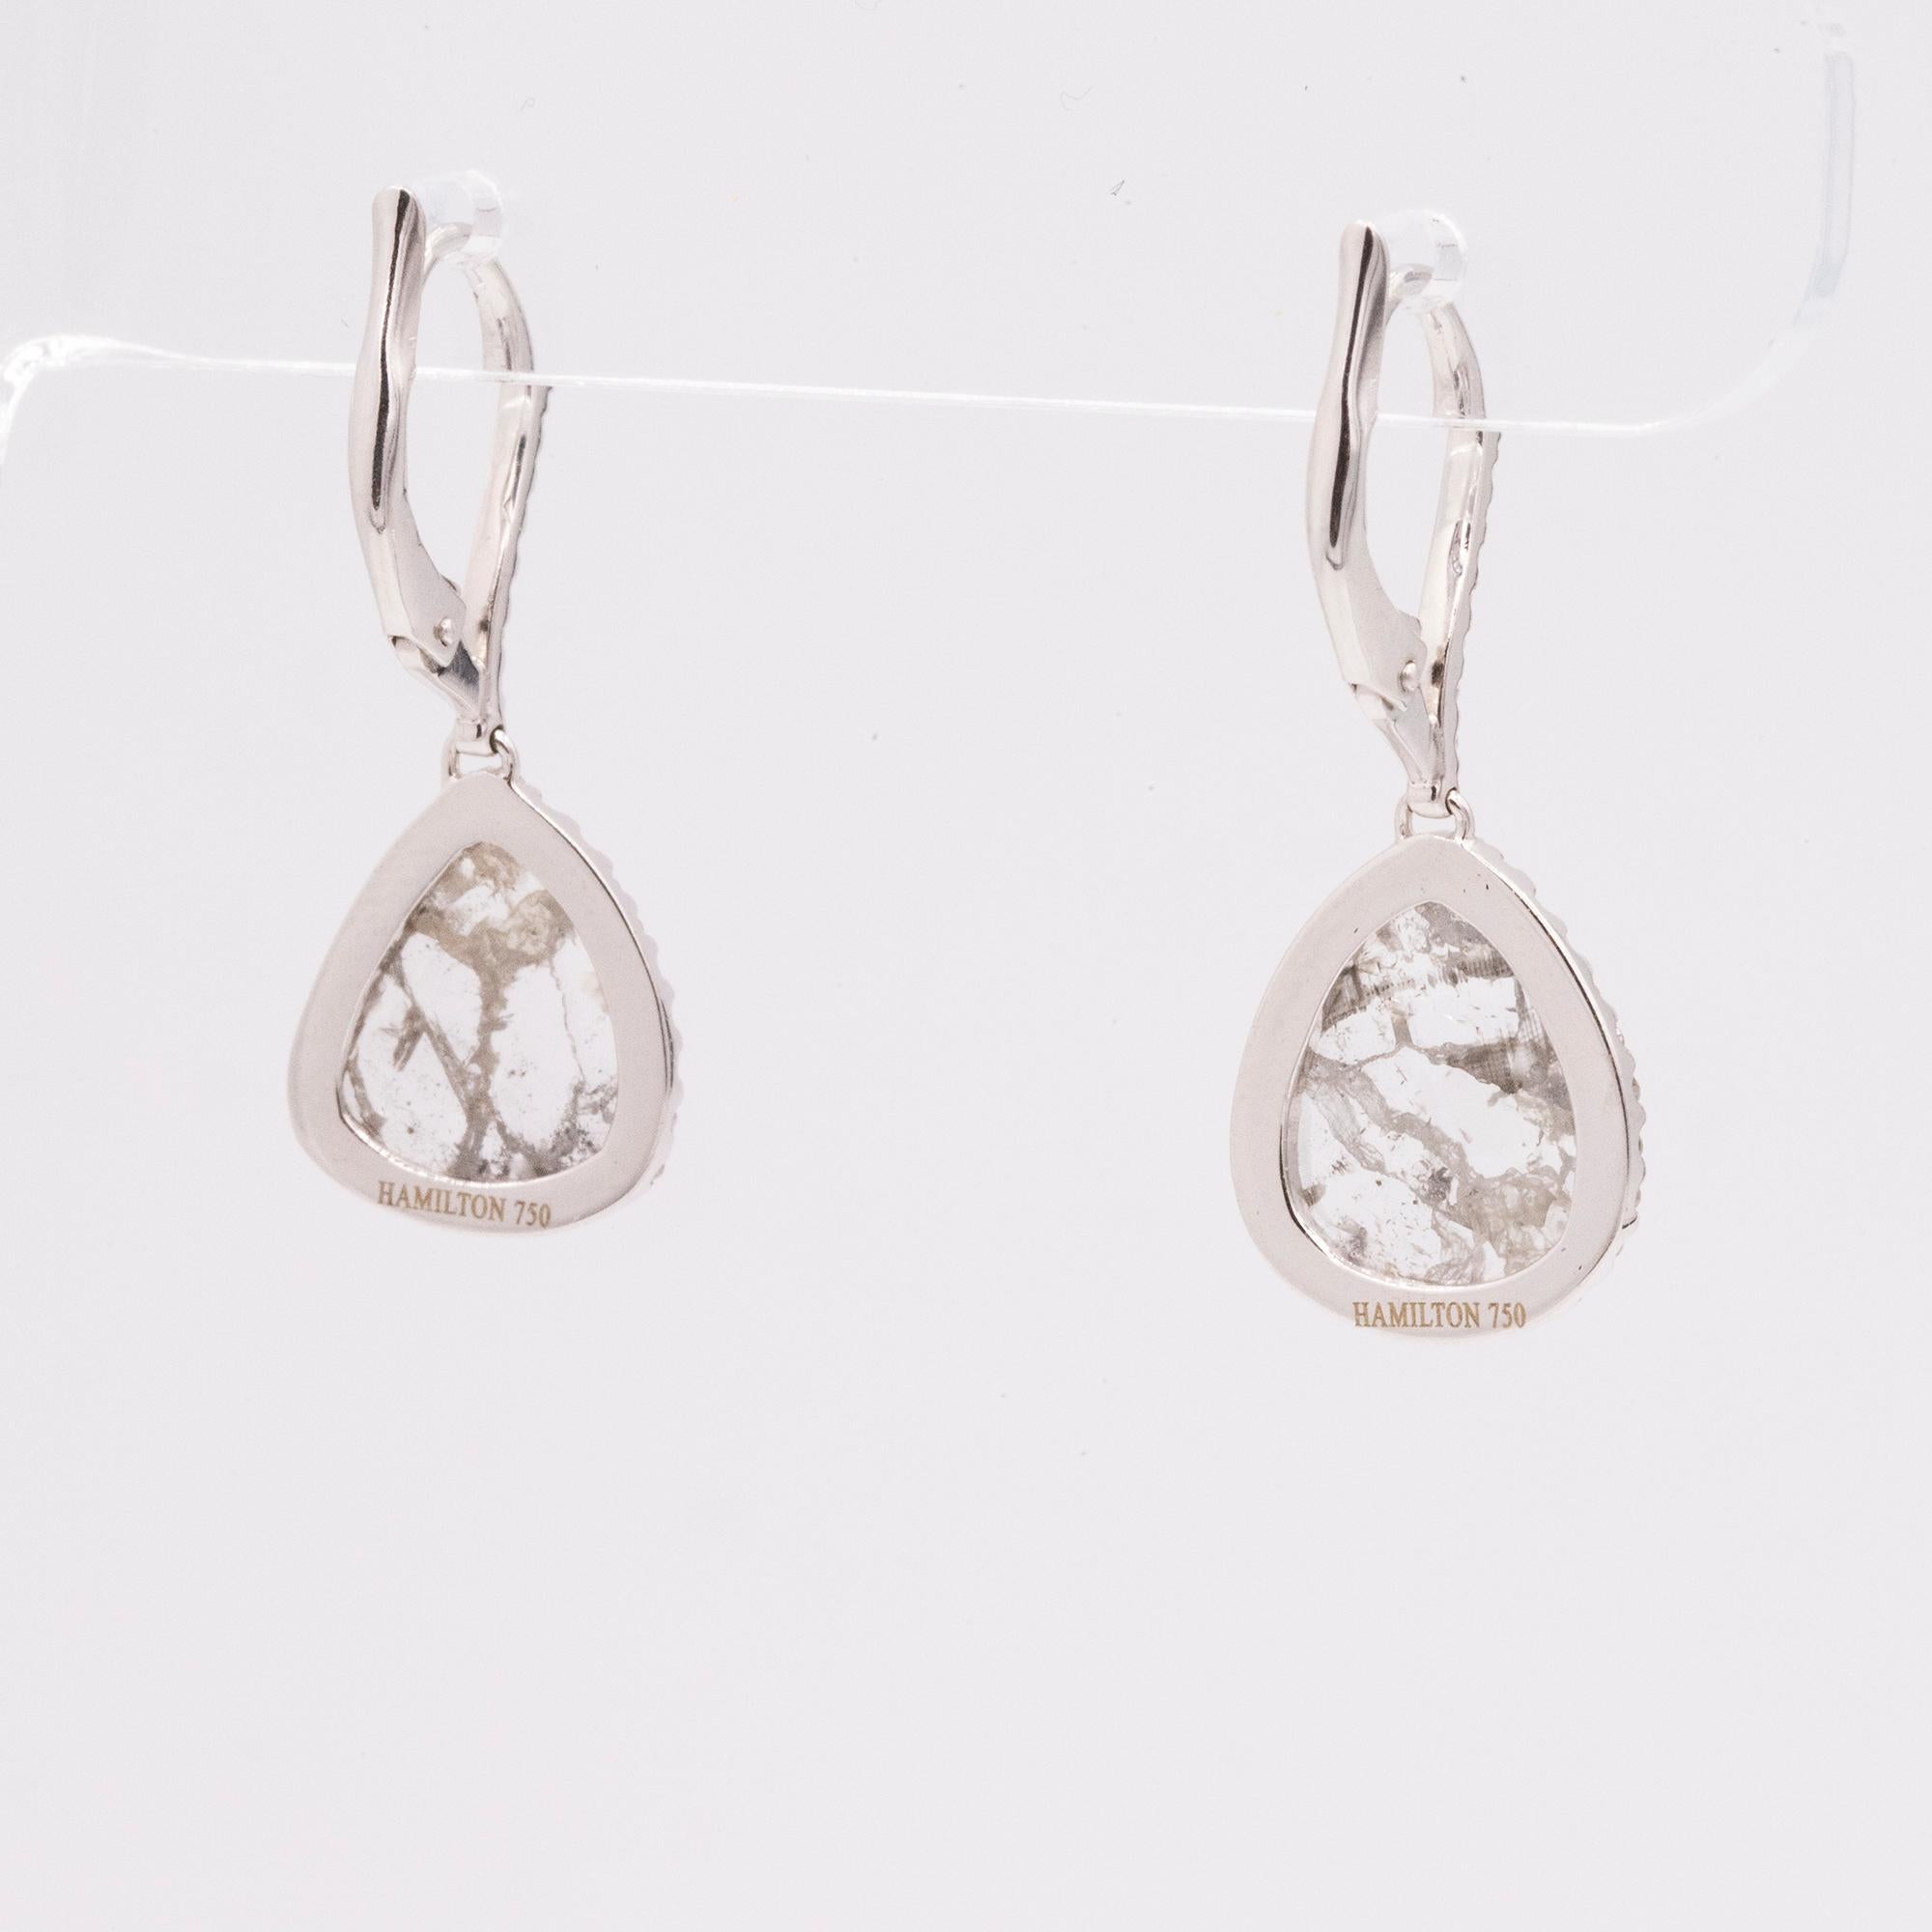 These beautiful handmade drop earrings feature two natural diamond slices that weigh 2.59 carats total. Accented with 72 pave set round diamonds that are also on the front on the ear wire, weighing .30cts total. G color and VS clarity. Crafted in